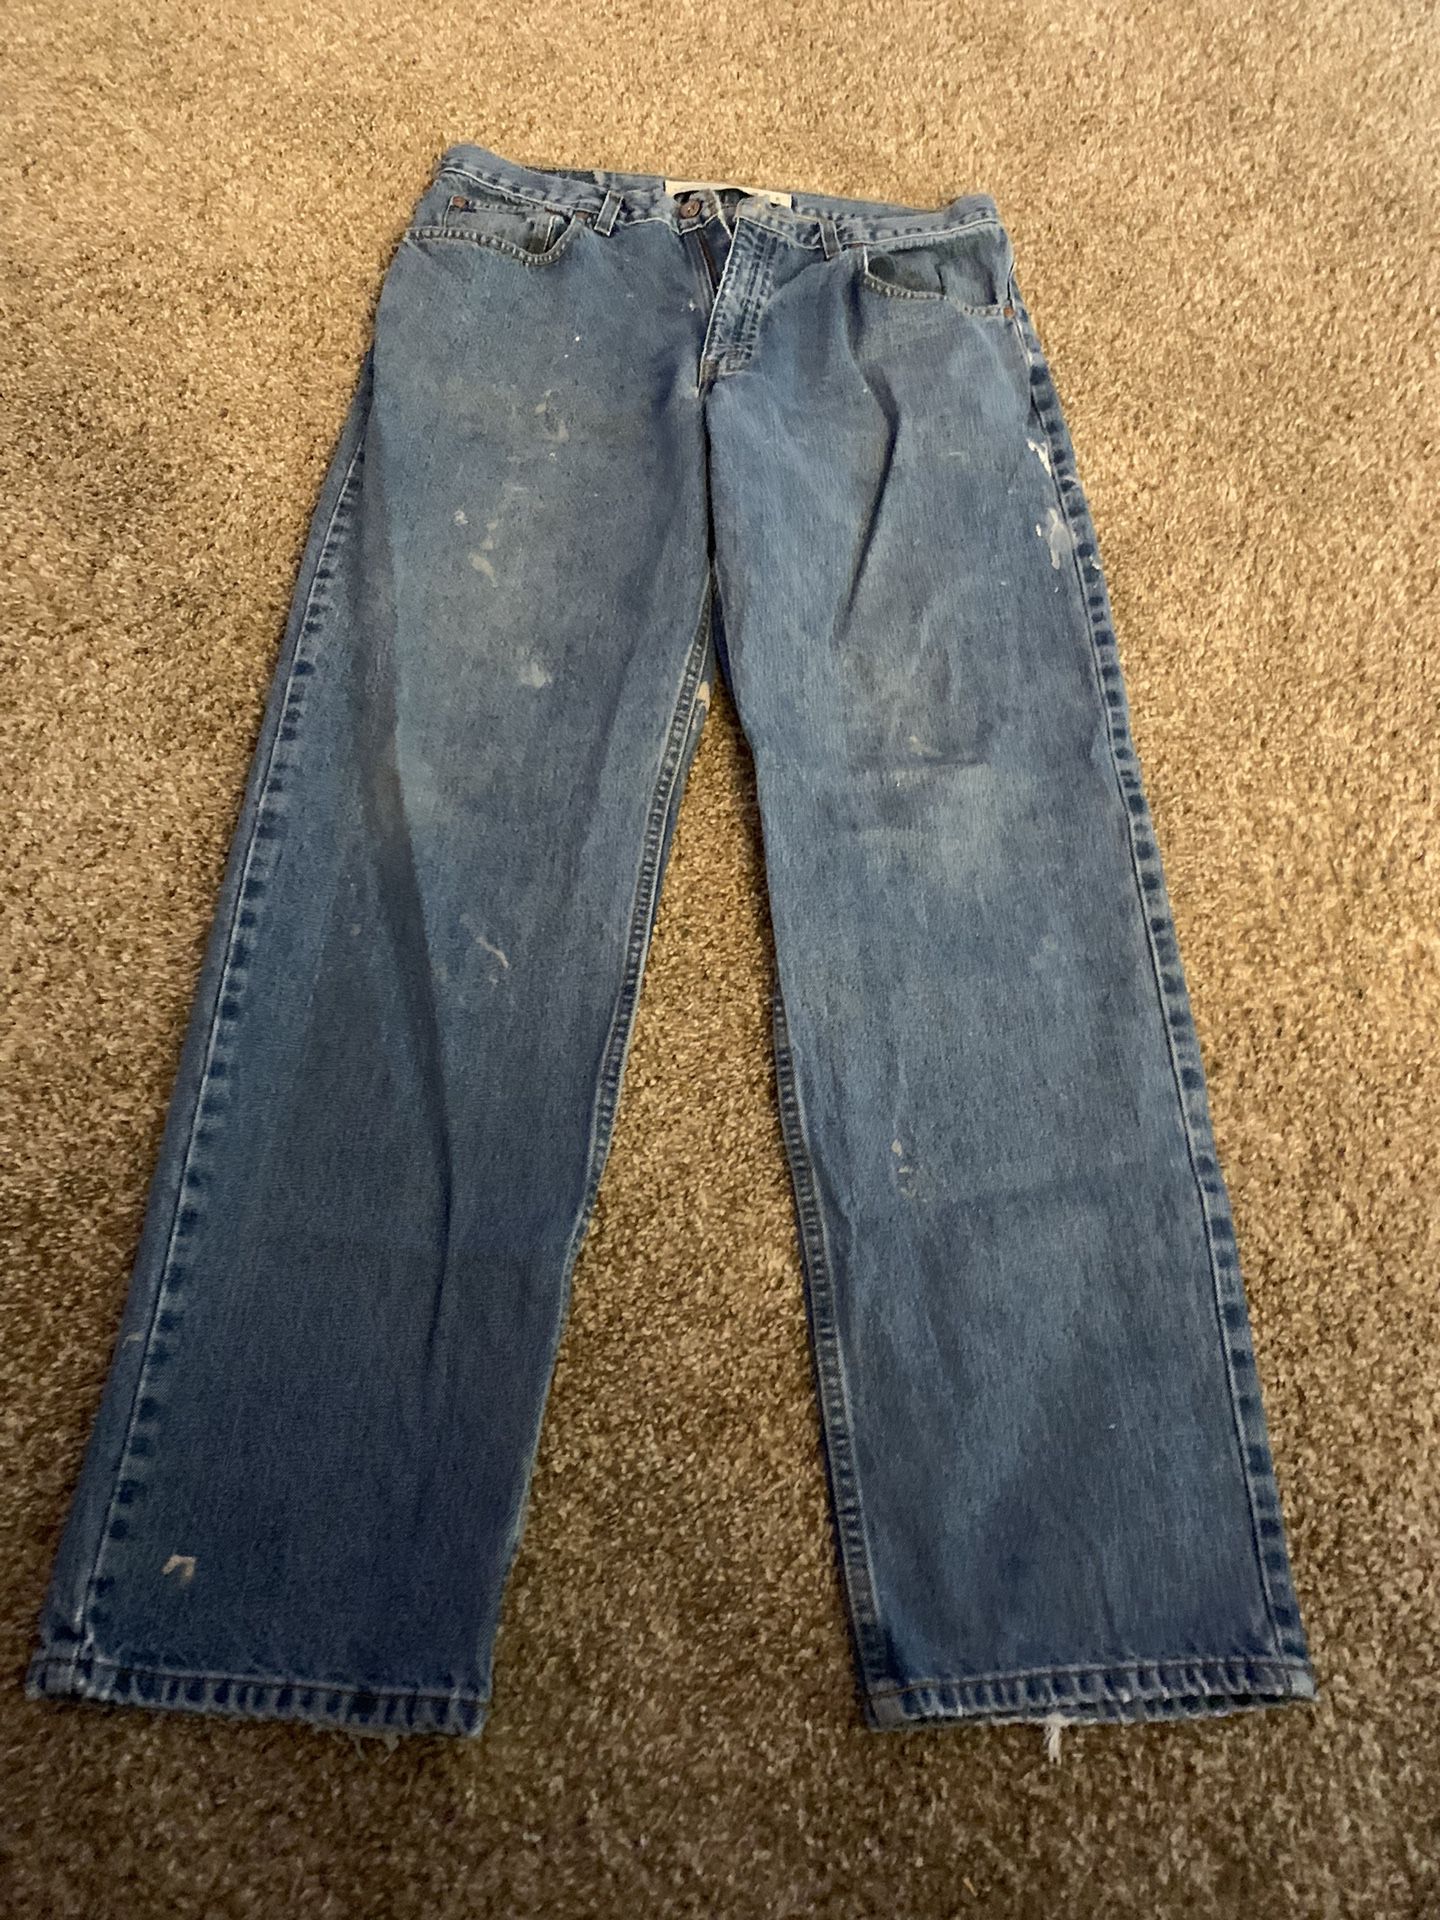 Mens work jeans size 36 x 34